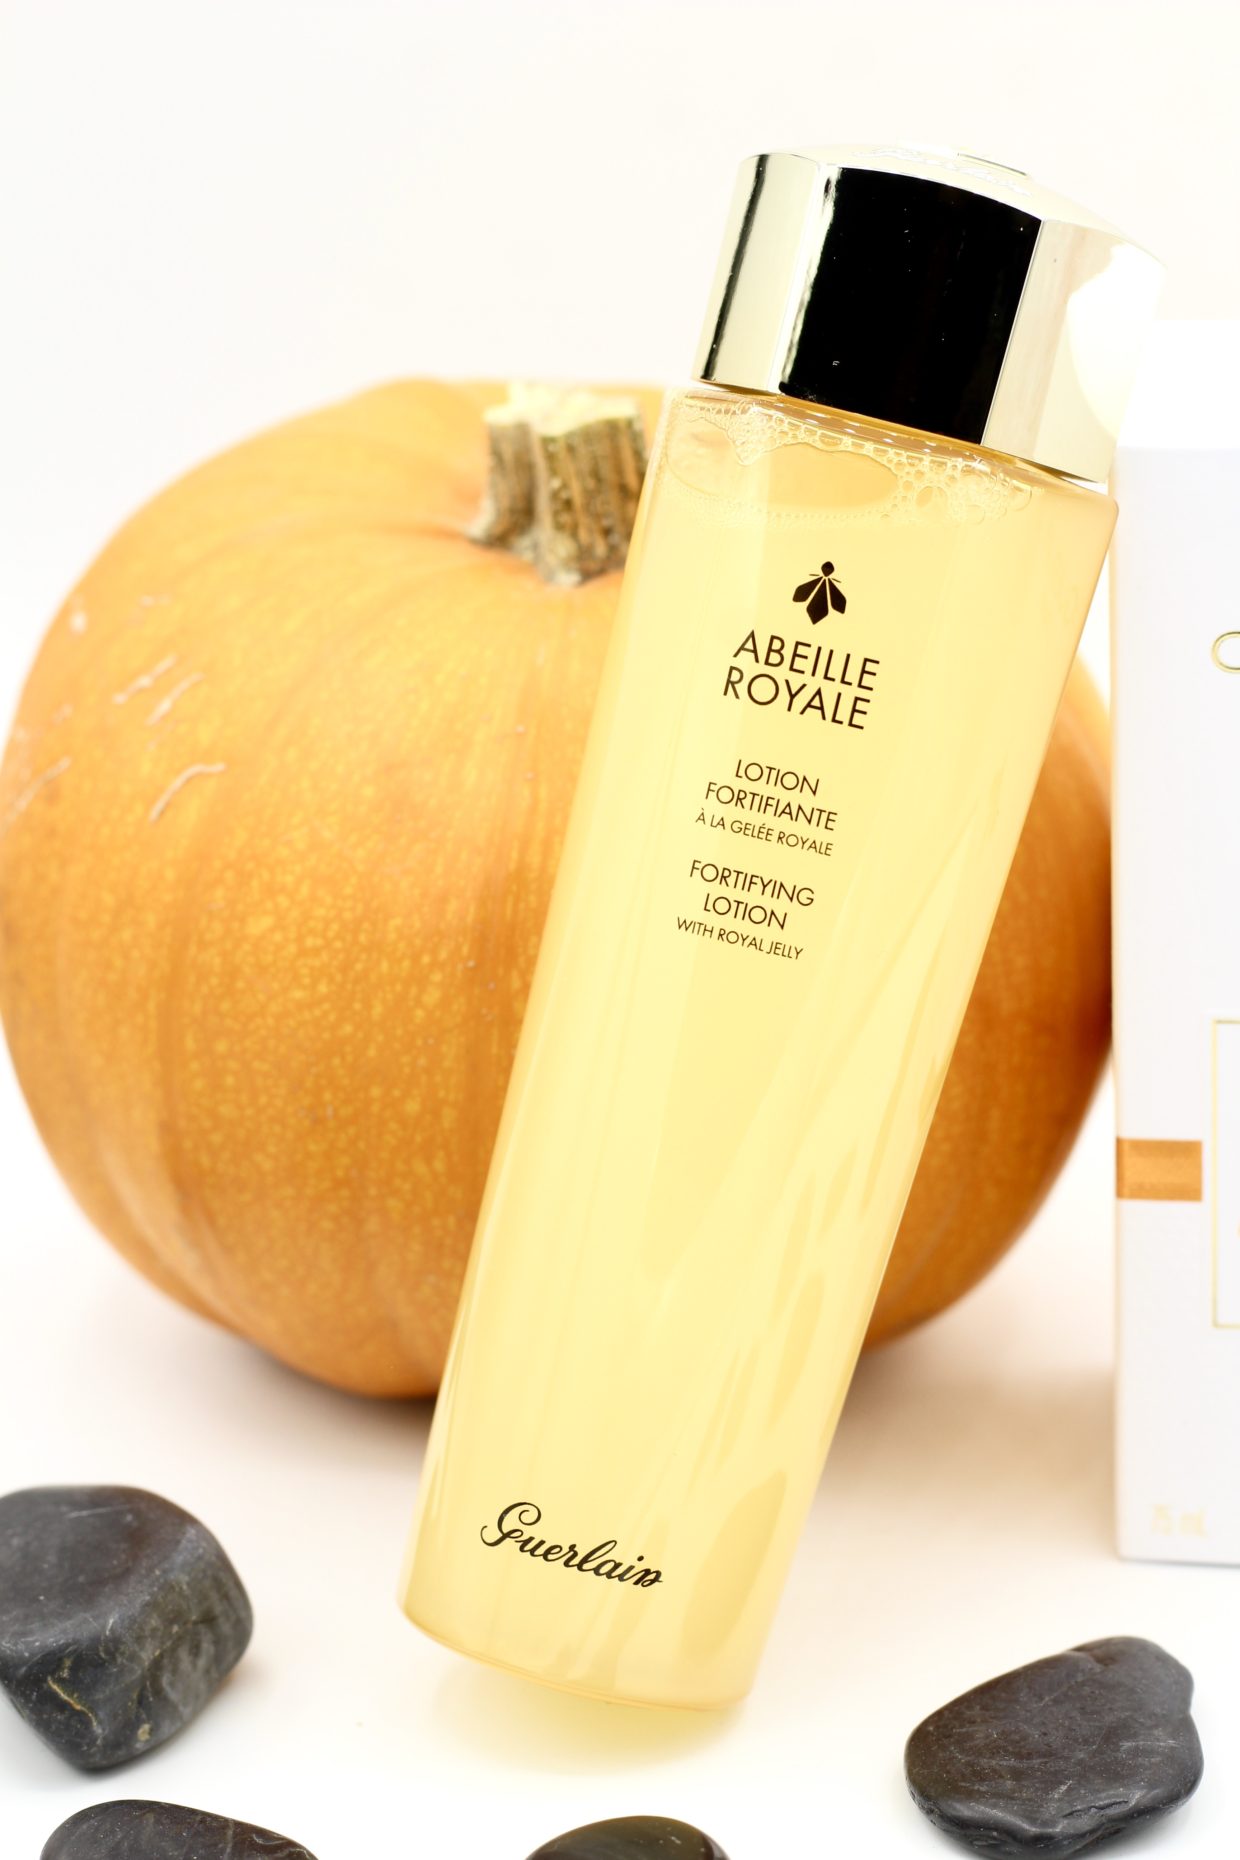 Guerlain Abeille ROyale Fortifying Lotion review